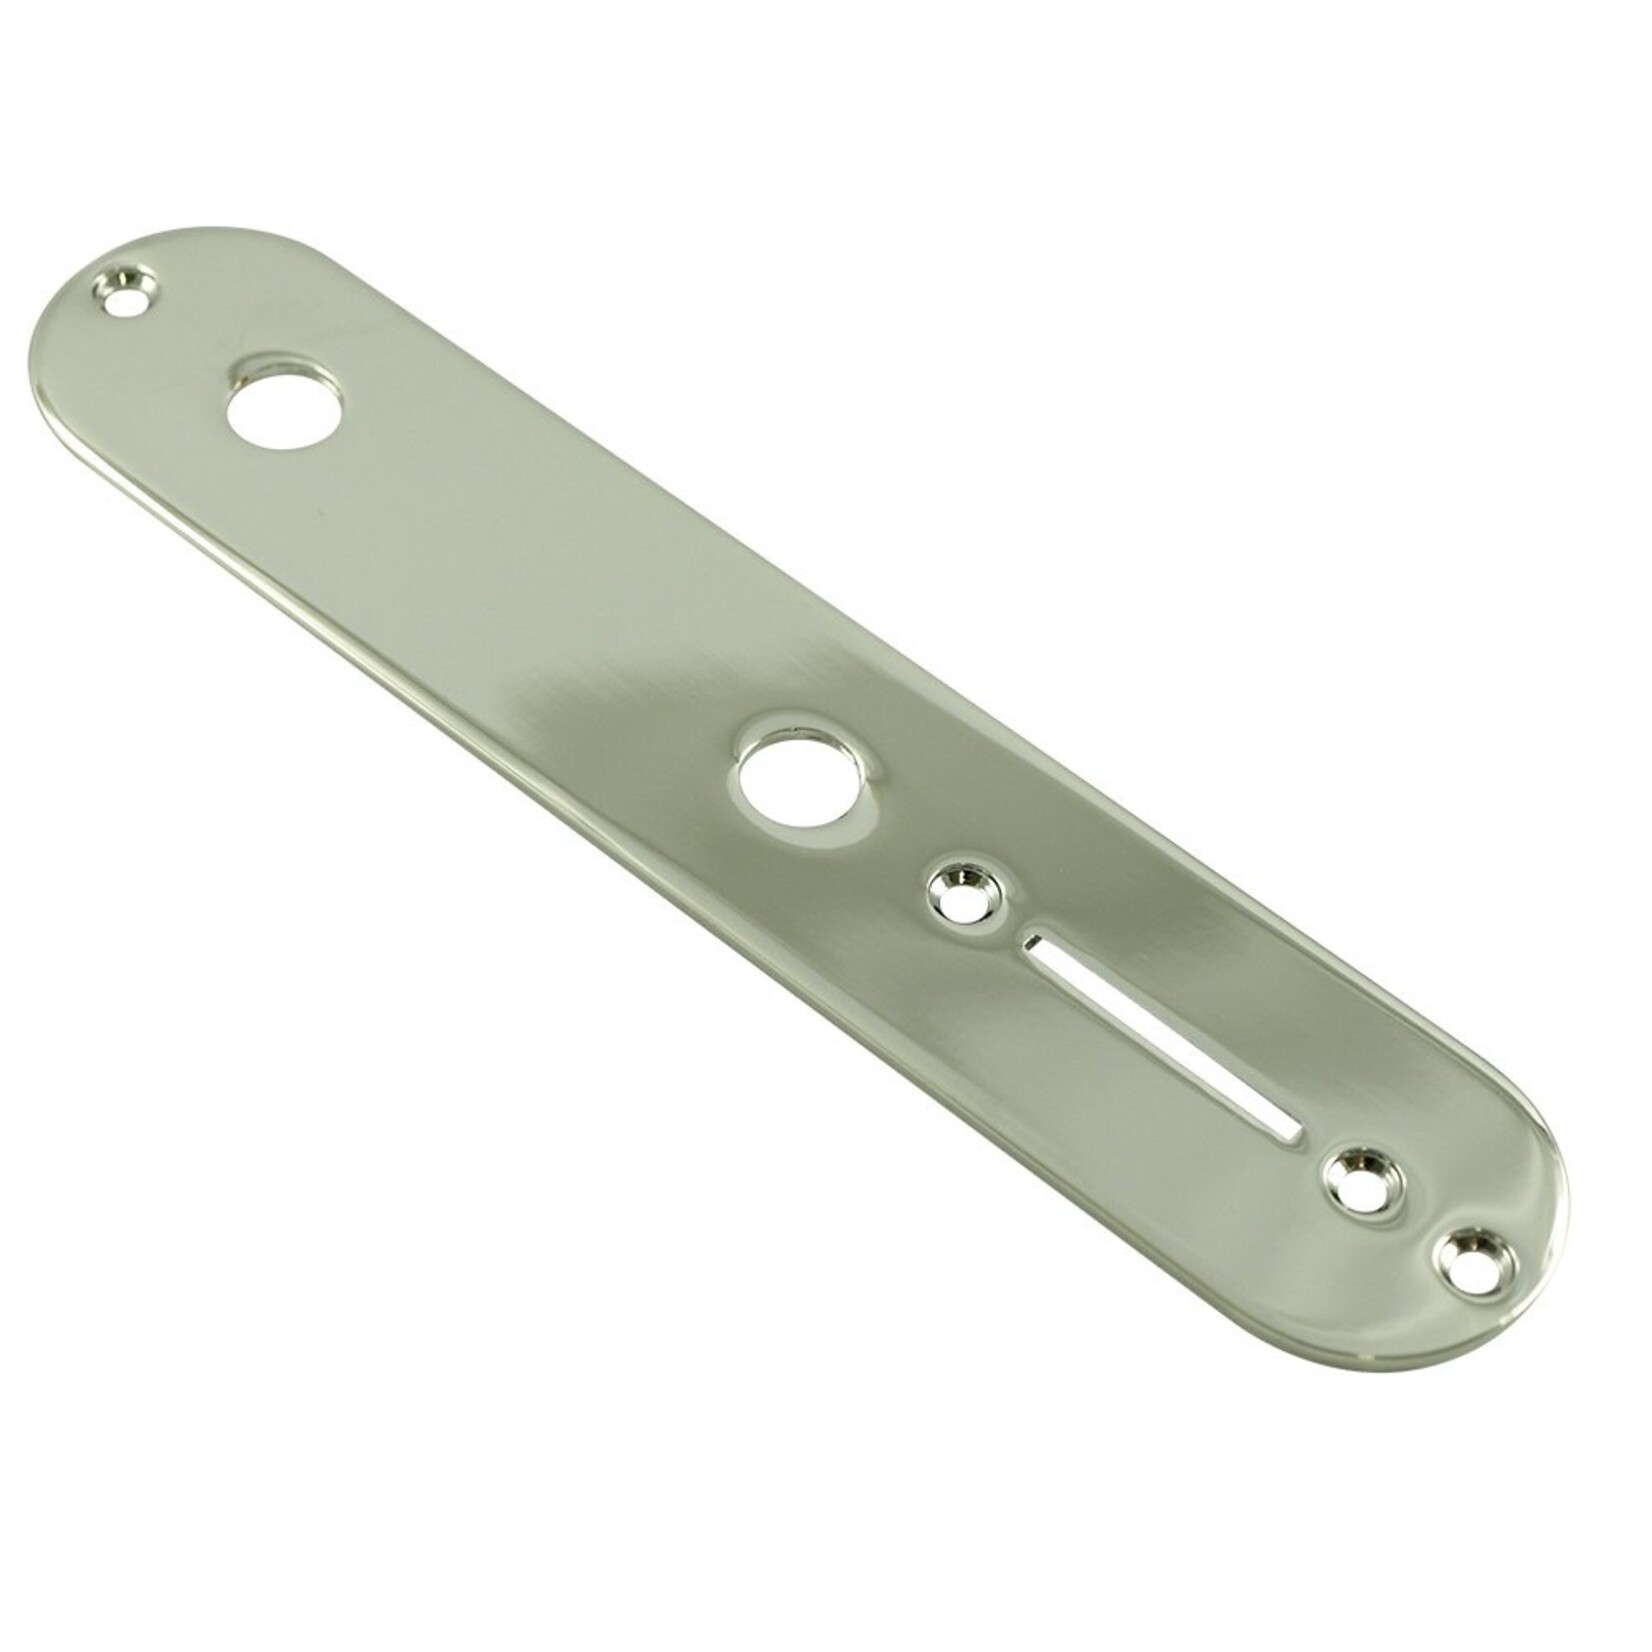 WD Music Control Plate for Fender Telecaster